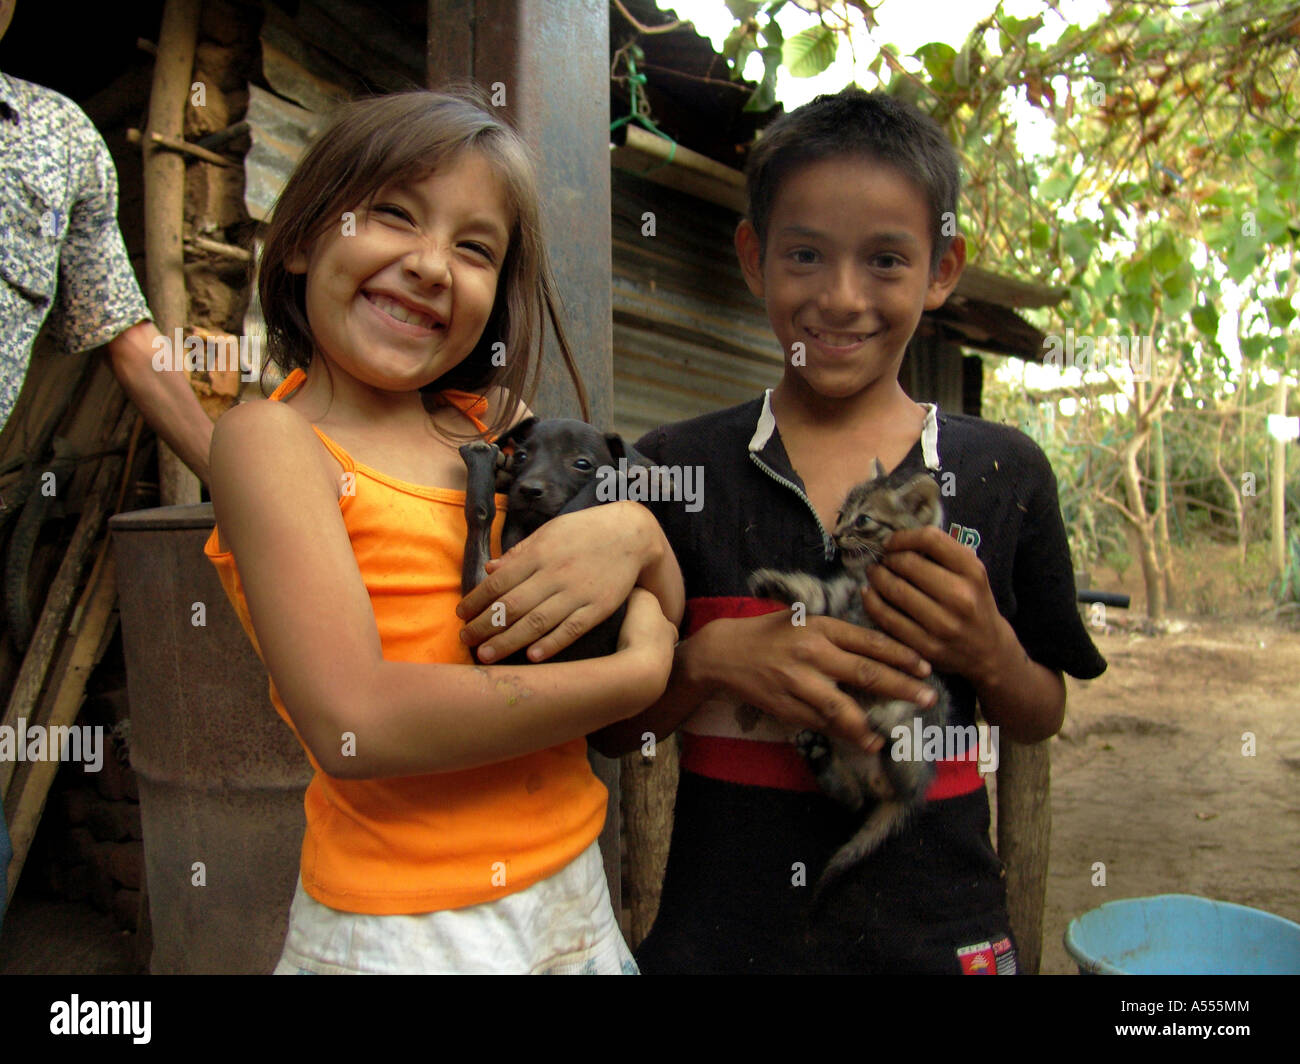 Painet ip2546 salvador brother sister puppy kitten san francsisco javier country developing nation less economically Stock Photo